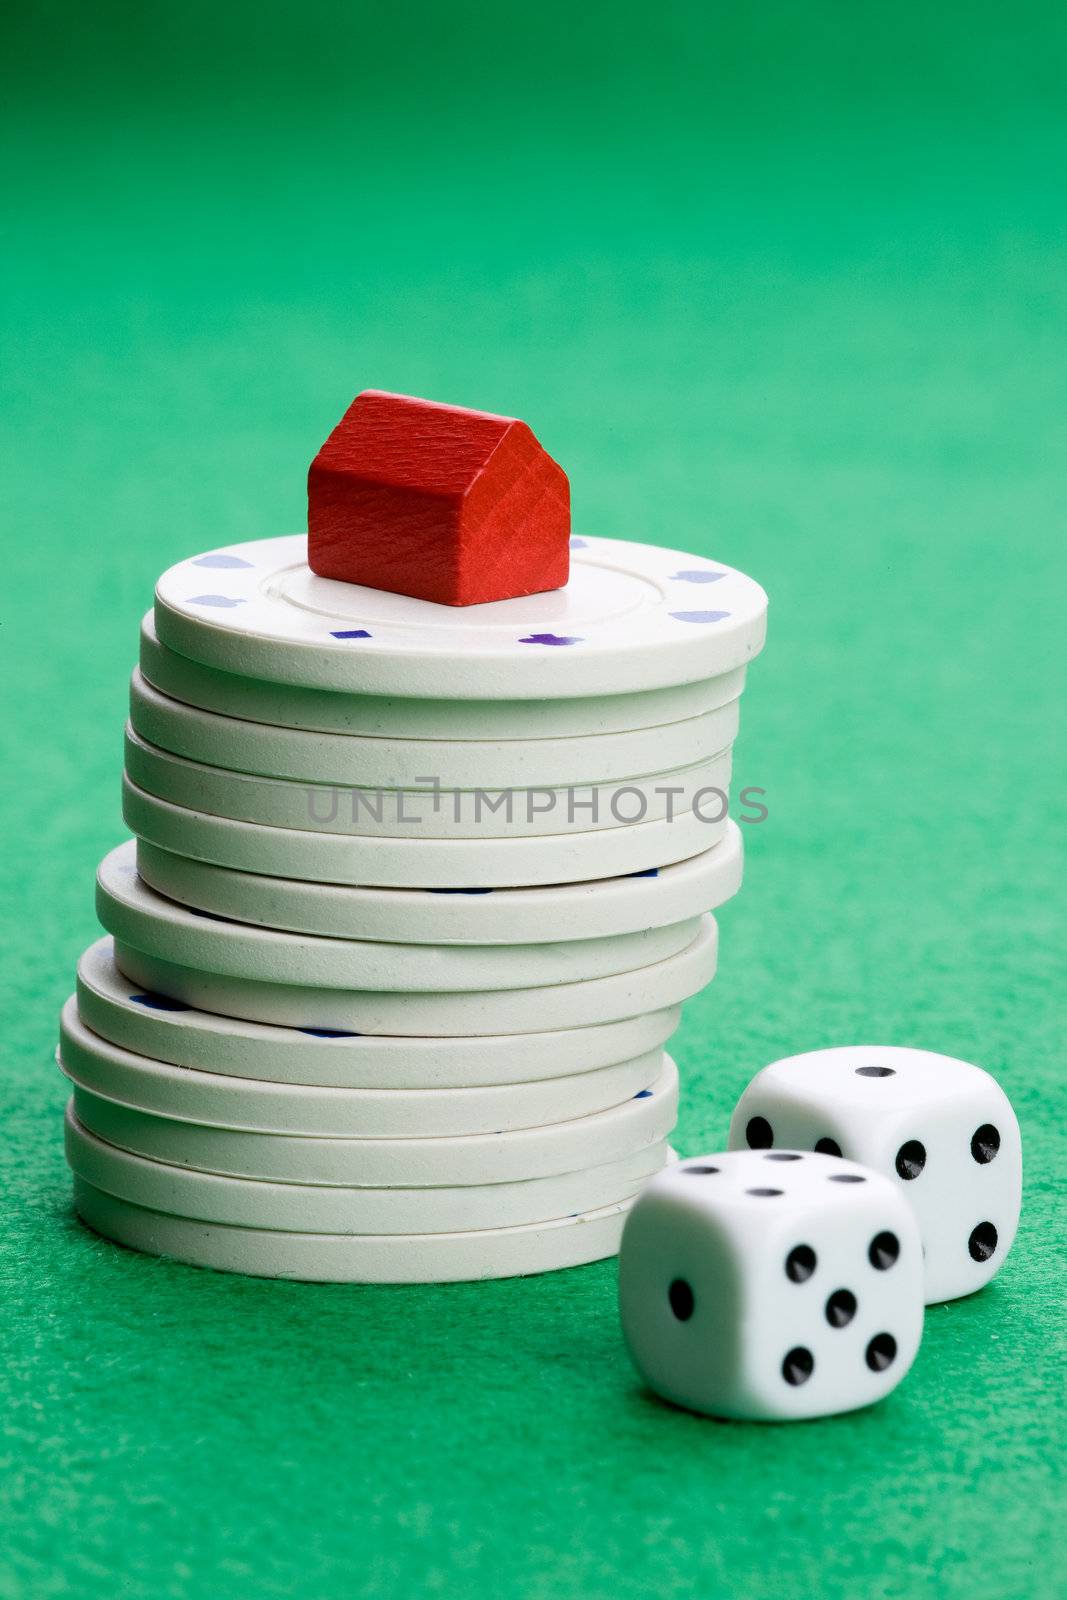 Casino chips with toy house - housing market gamble concept